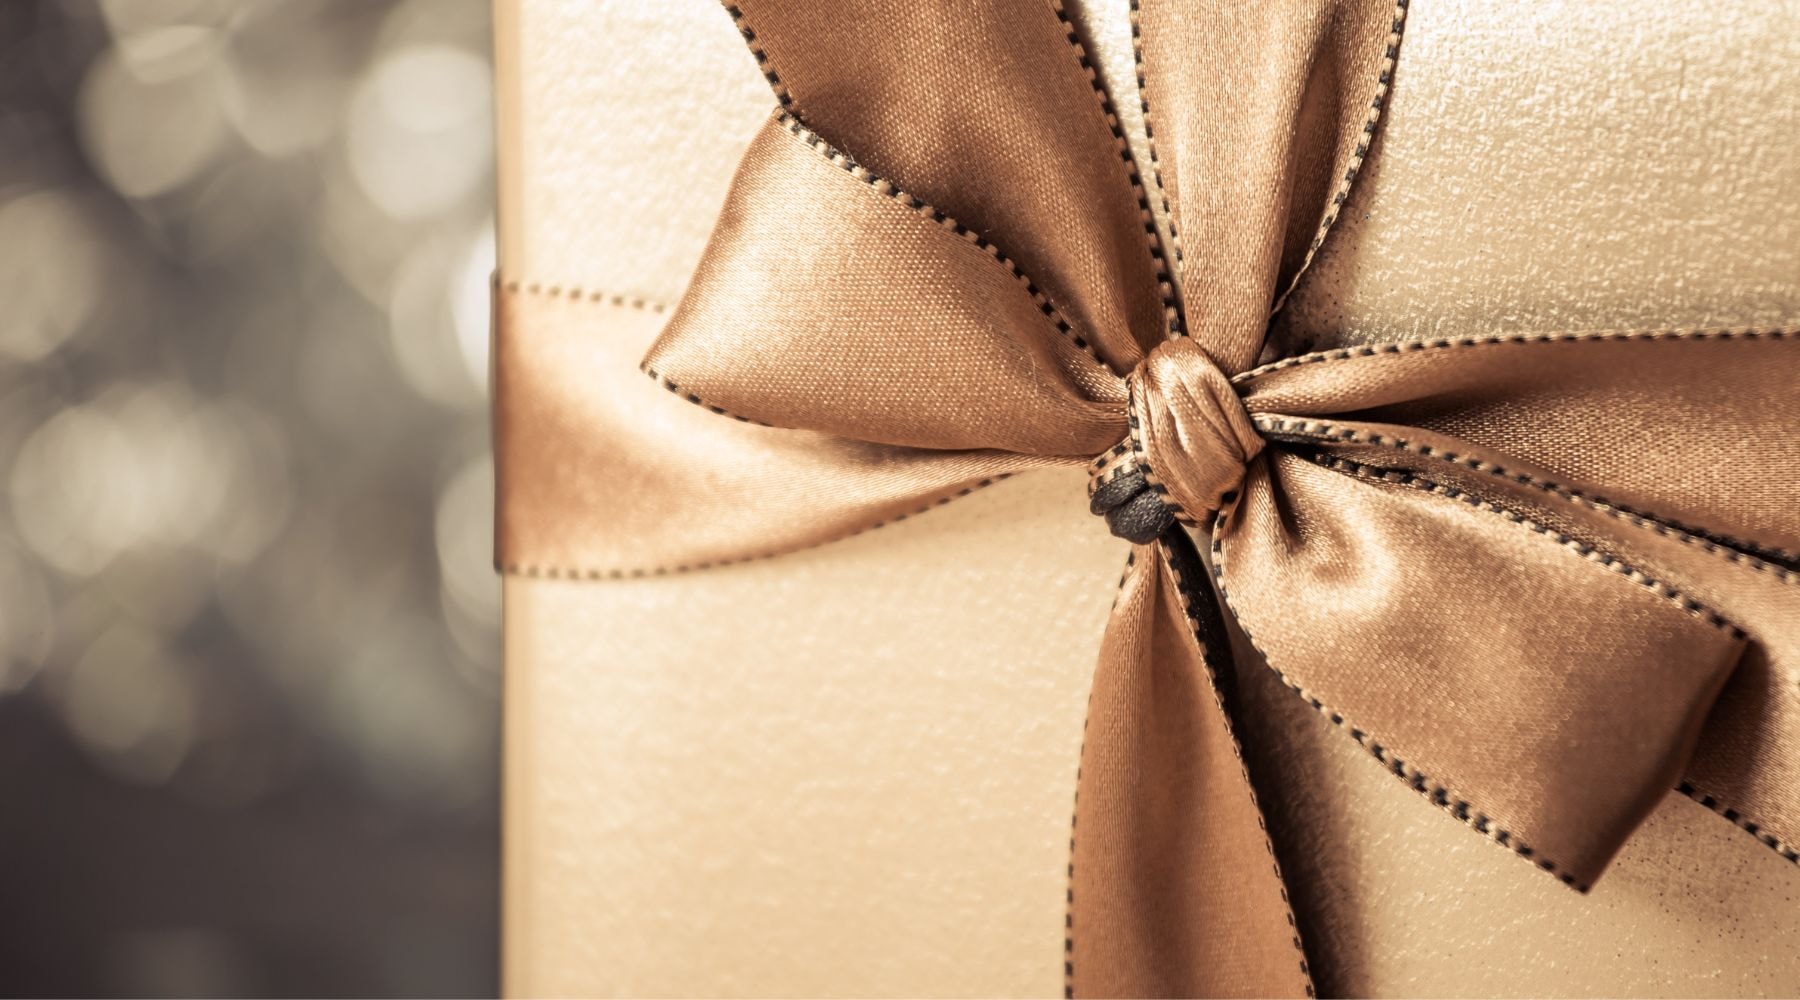 Close-up of a gold gift box featuring a detailed satin bow, set against a softly blurred background.